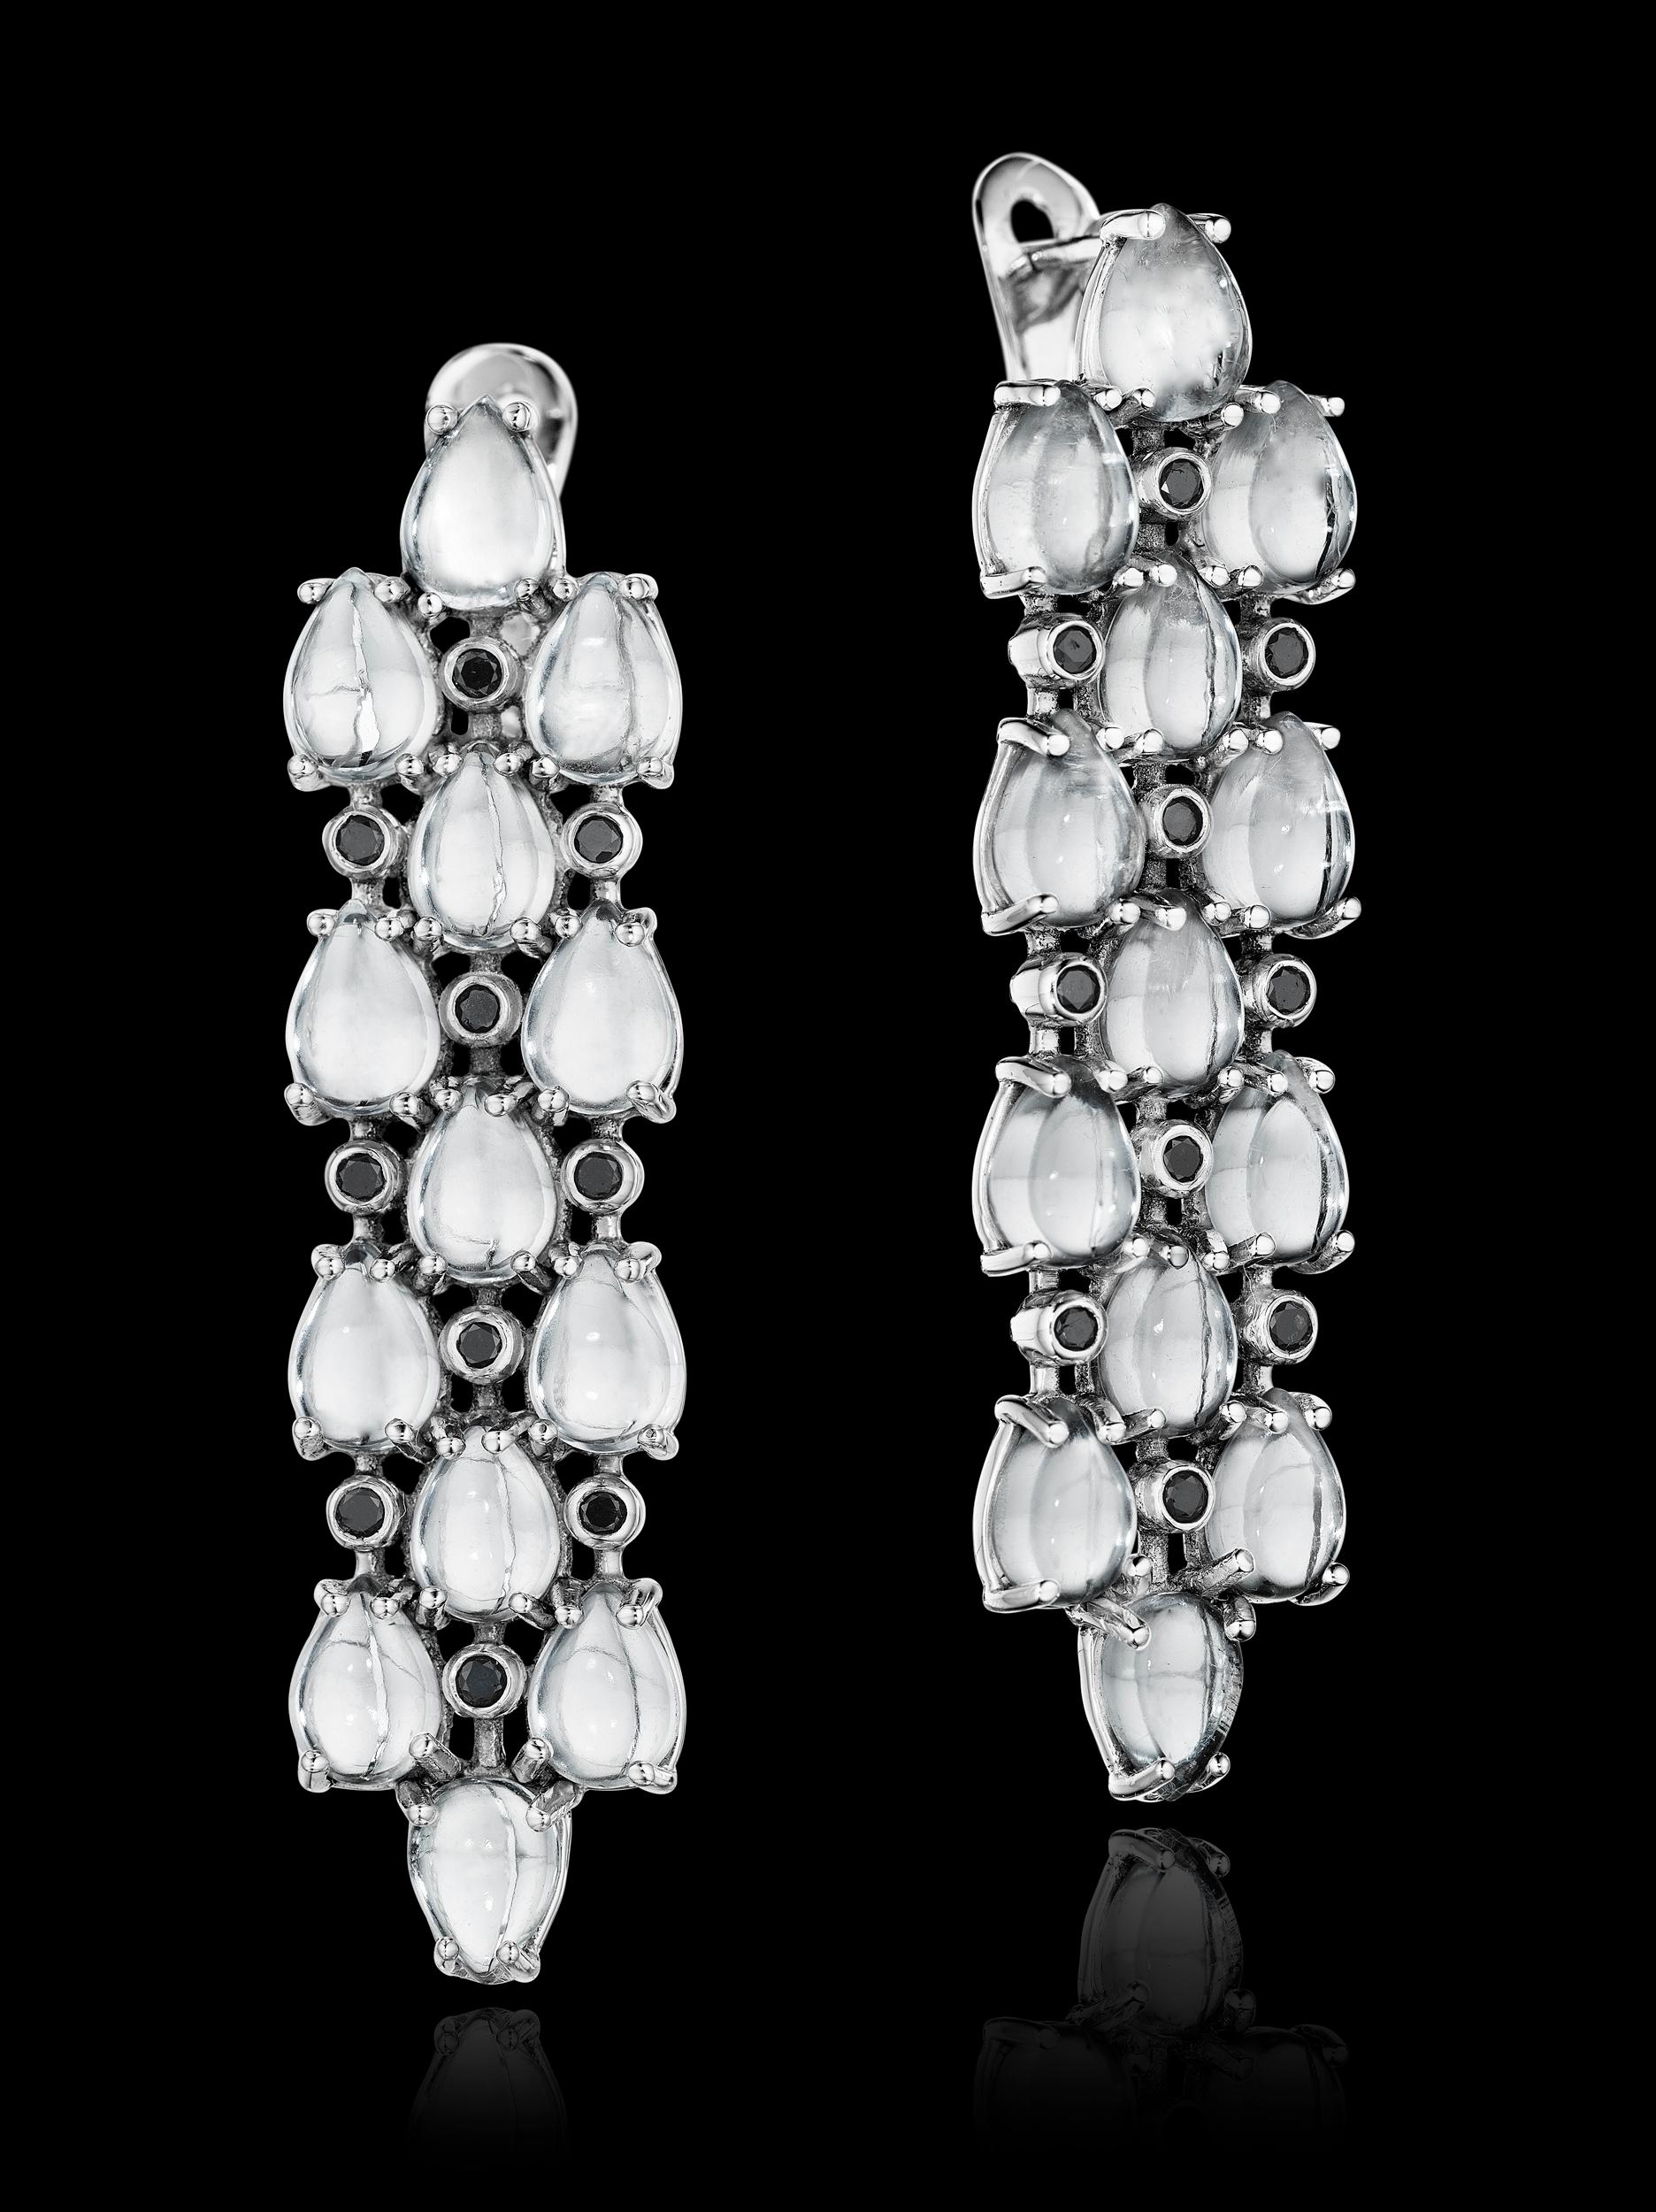 Limited edition YOKI design, features 26 5x7mm Cabochon Pear Shaped White Topaz approx. 27.1cts. Total Black Diamond weight is approx. 0.3cts. Earrings are set on 18 karat white gold. Earring measures approx. 1.2cm face width across and 5.1cm face